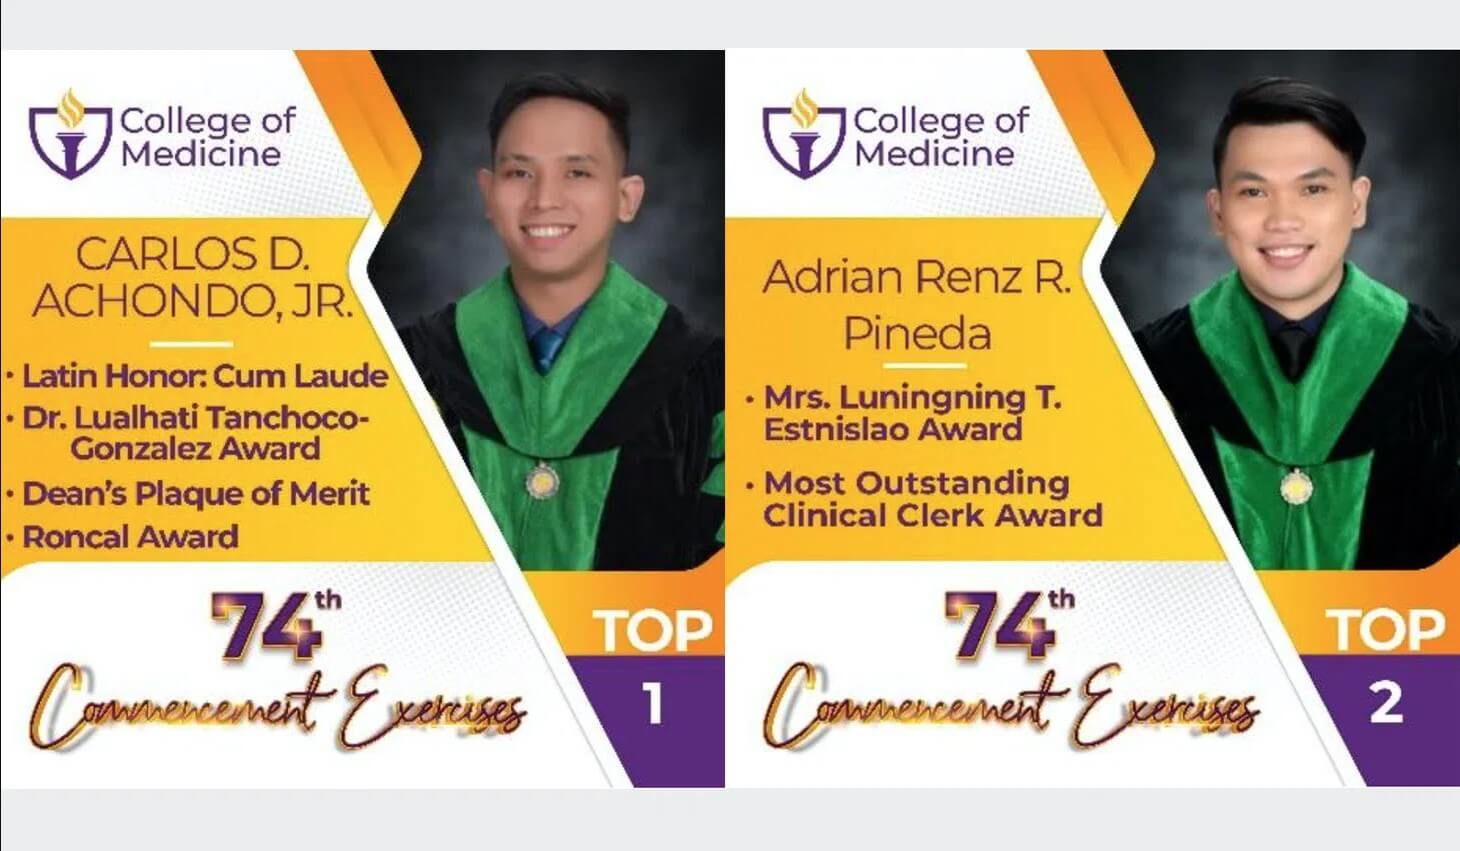 74th Commencement Exercises List of Awardees for College of Medicines